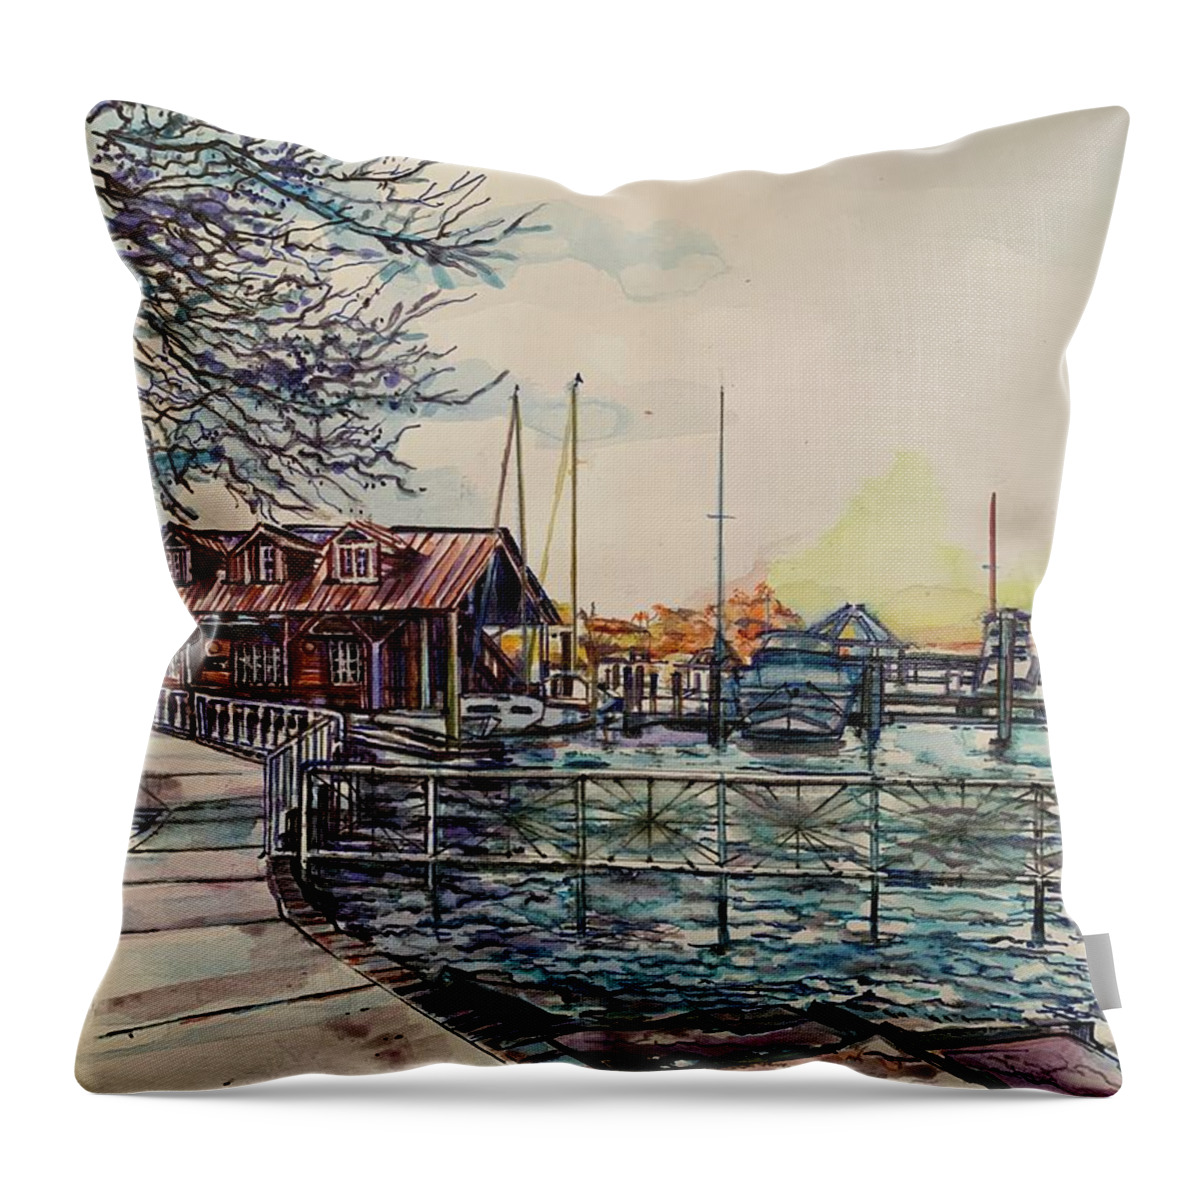  Throw Pillow featuring the painting Docked by Try Cheatham